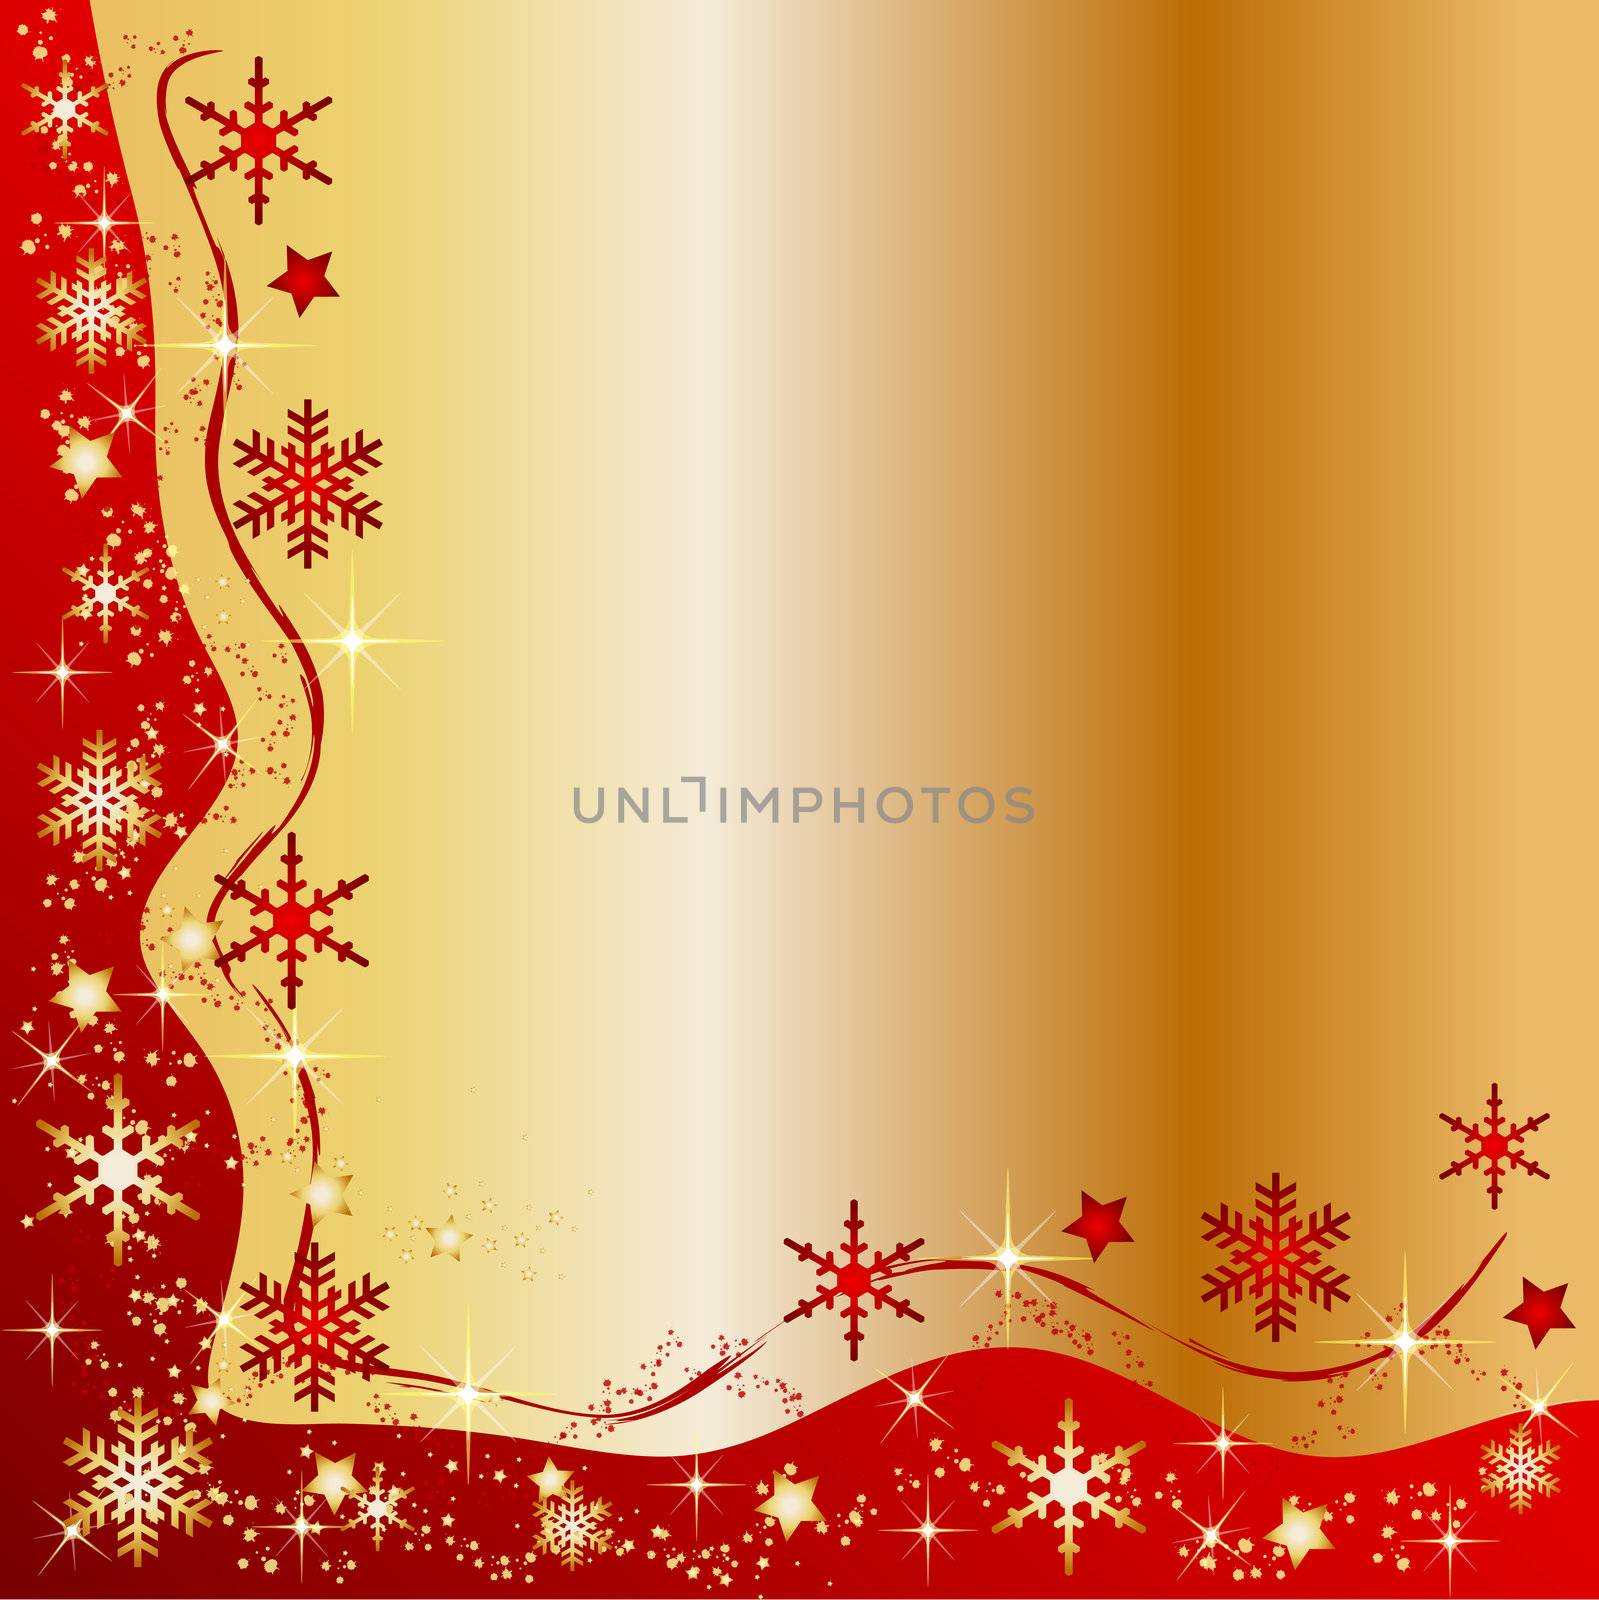 Illustration of a christmas frame background by peromarketing